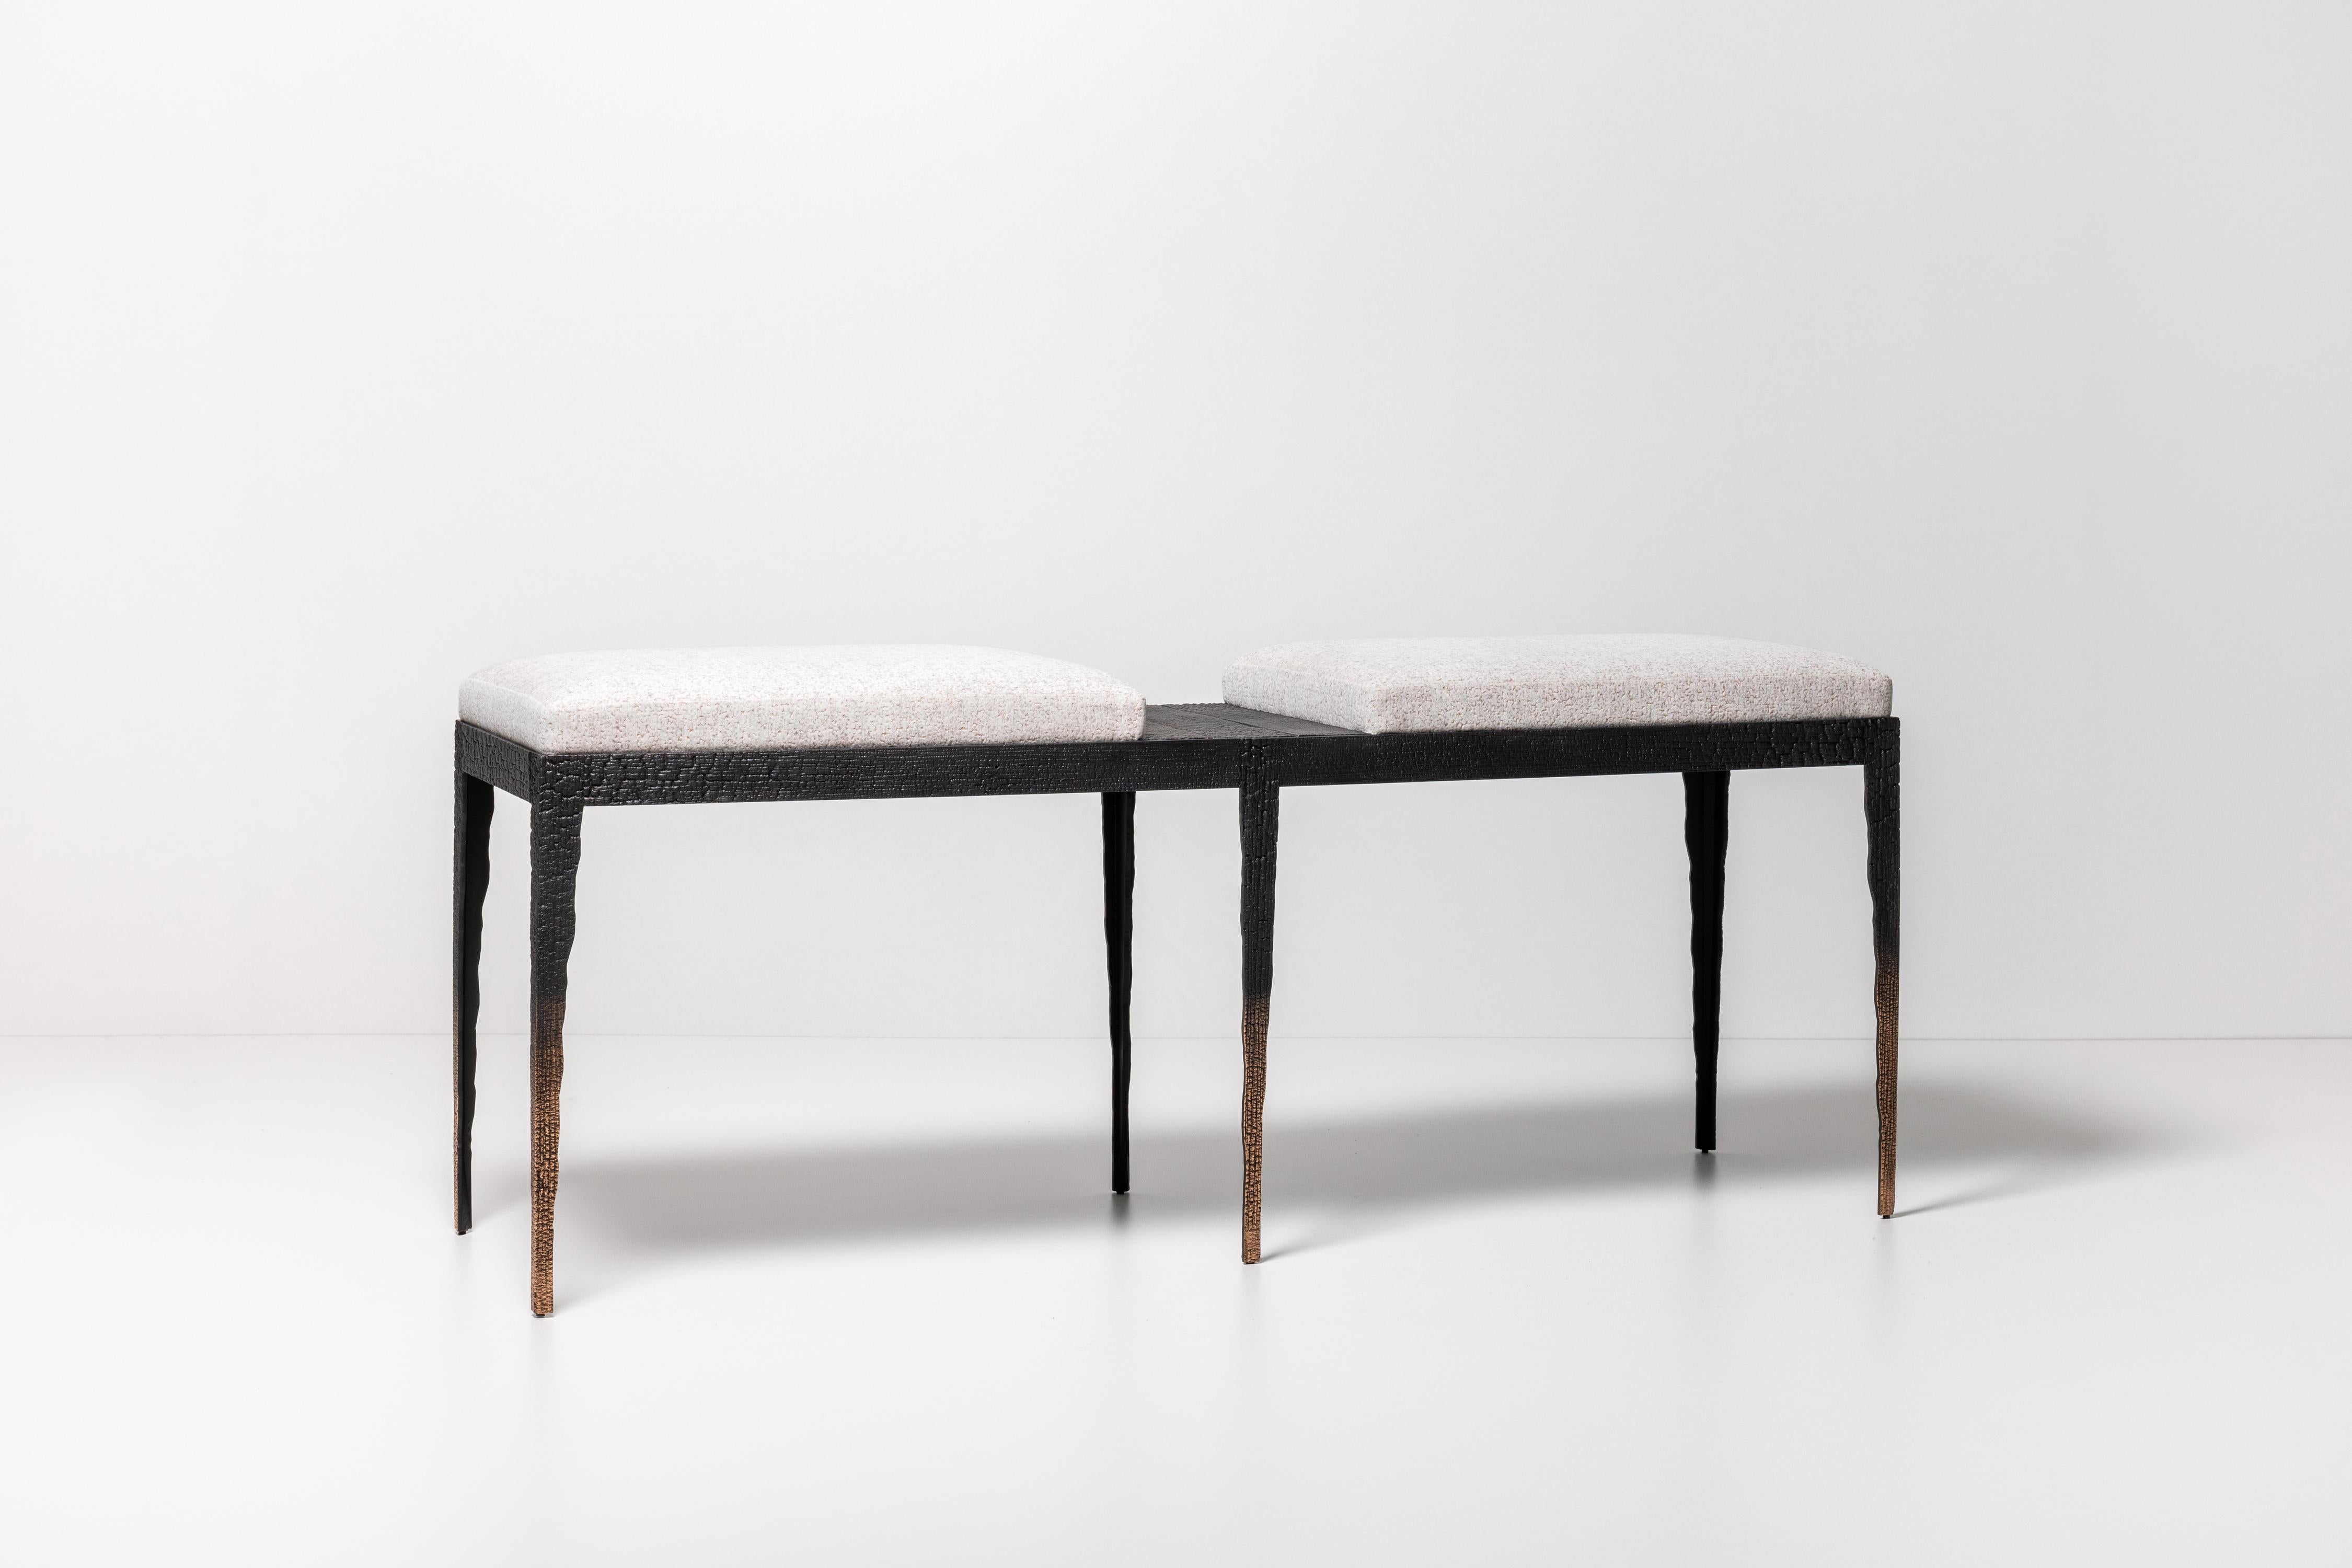 From his Empreinte Collection, a series of pieces centered around a theme of destruction and reconstruction, this six-legged bench is composed of patinated bronze cast from broken and burned wooden planks. Upholstered in an unbleached, structured